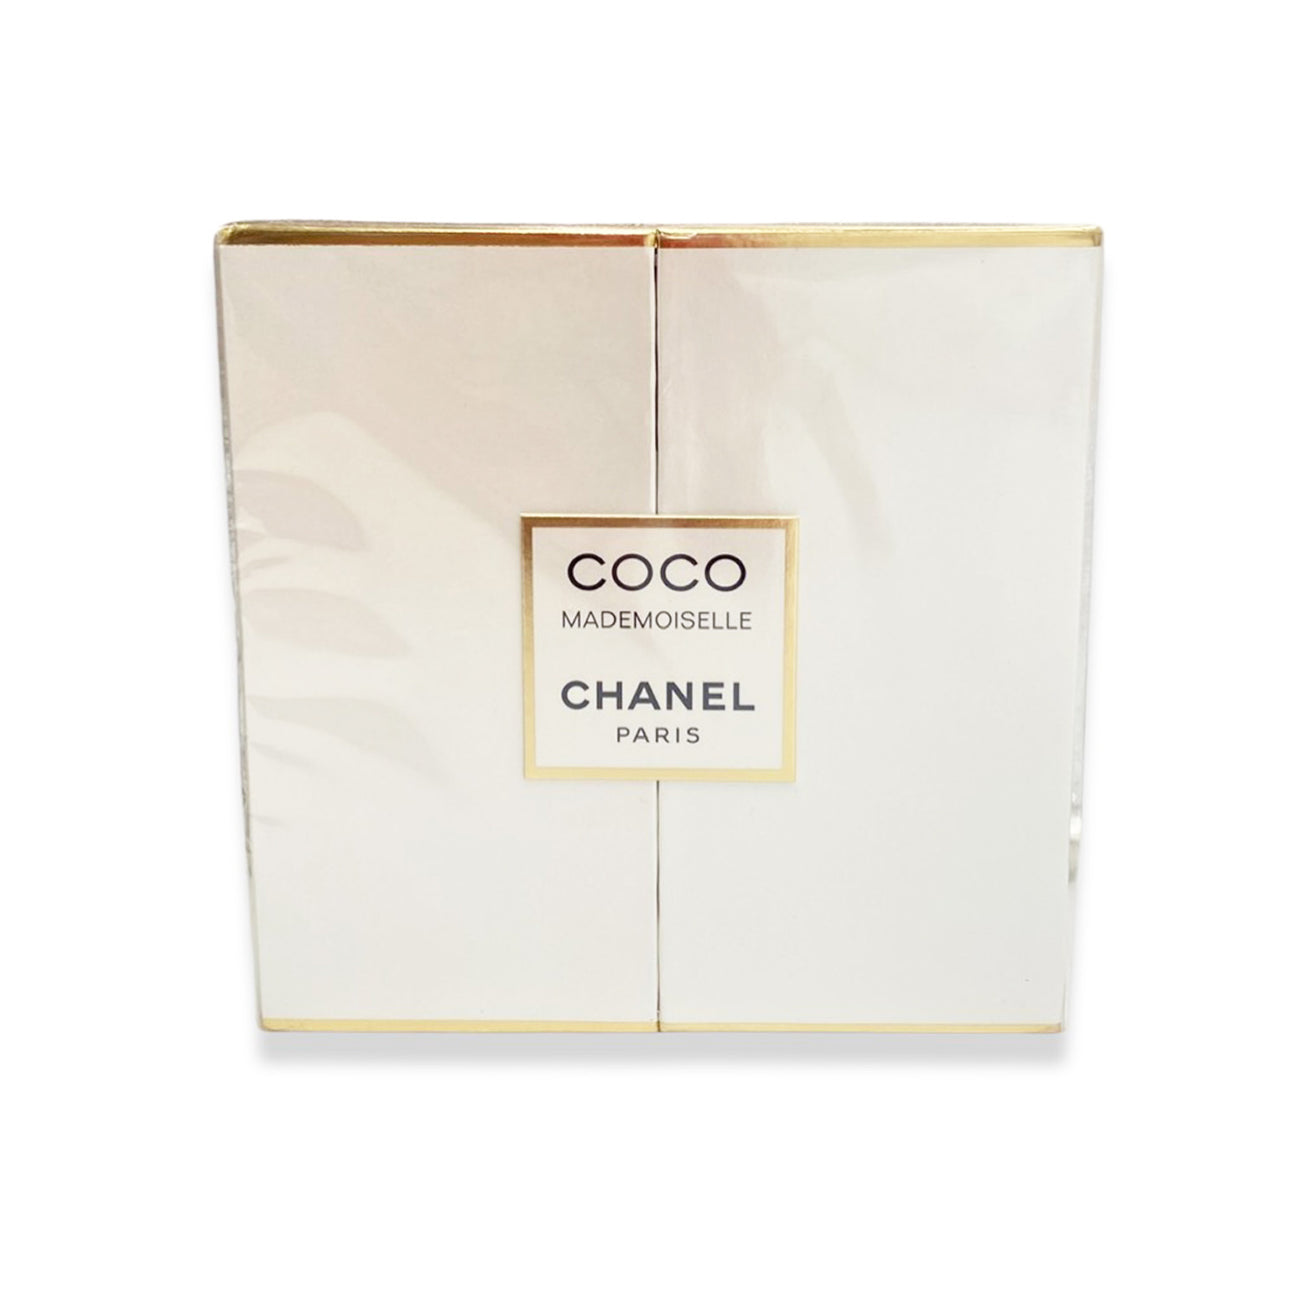 CHANEL Coco mademoiselle gift set of 5 perfumes – Loop Generation